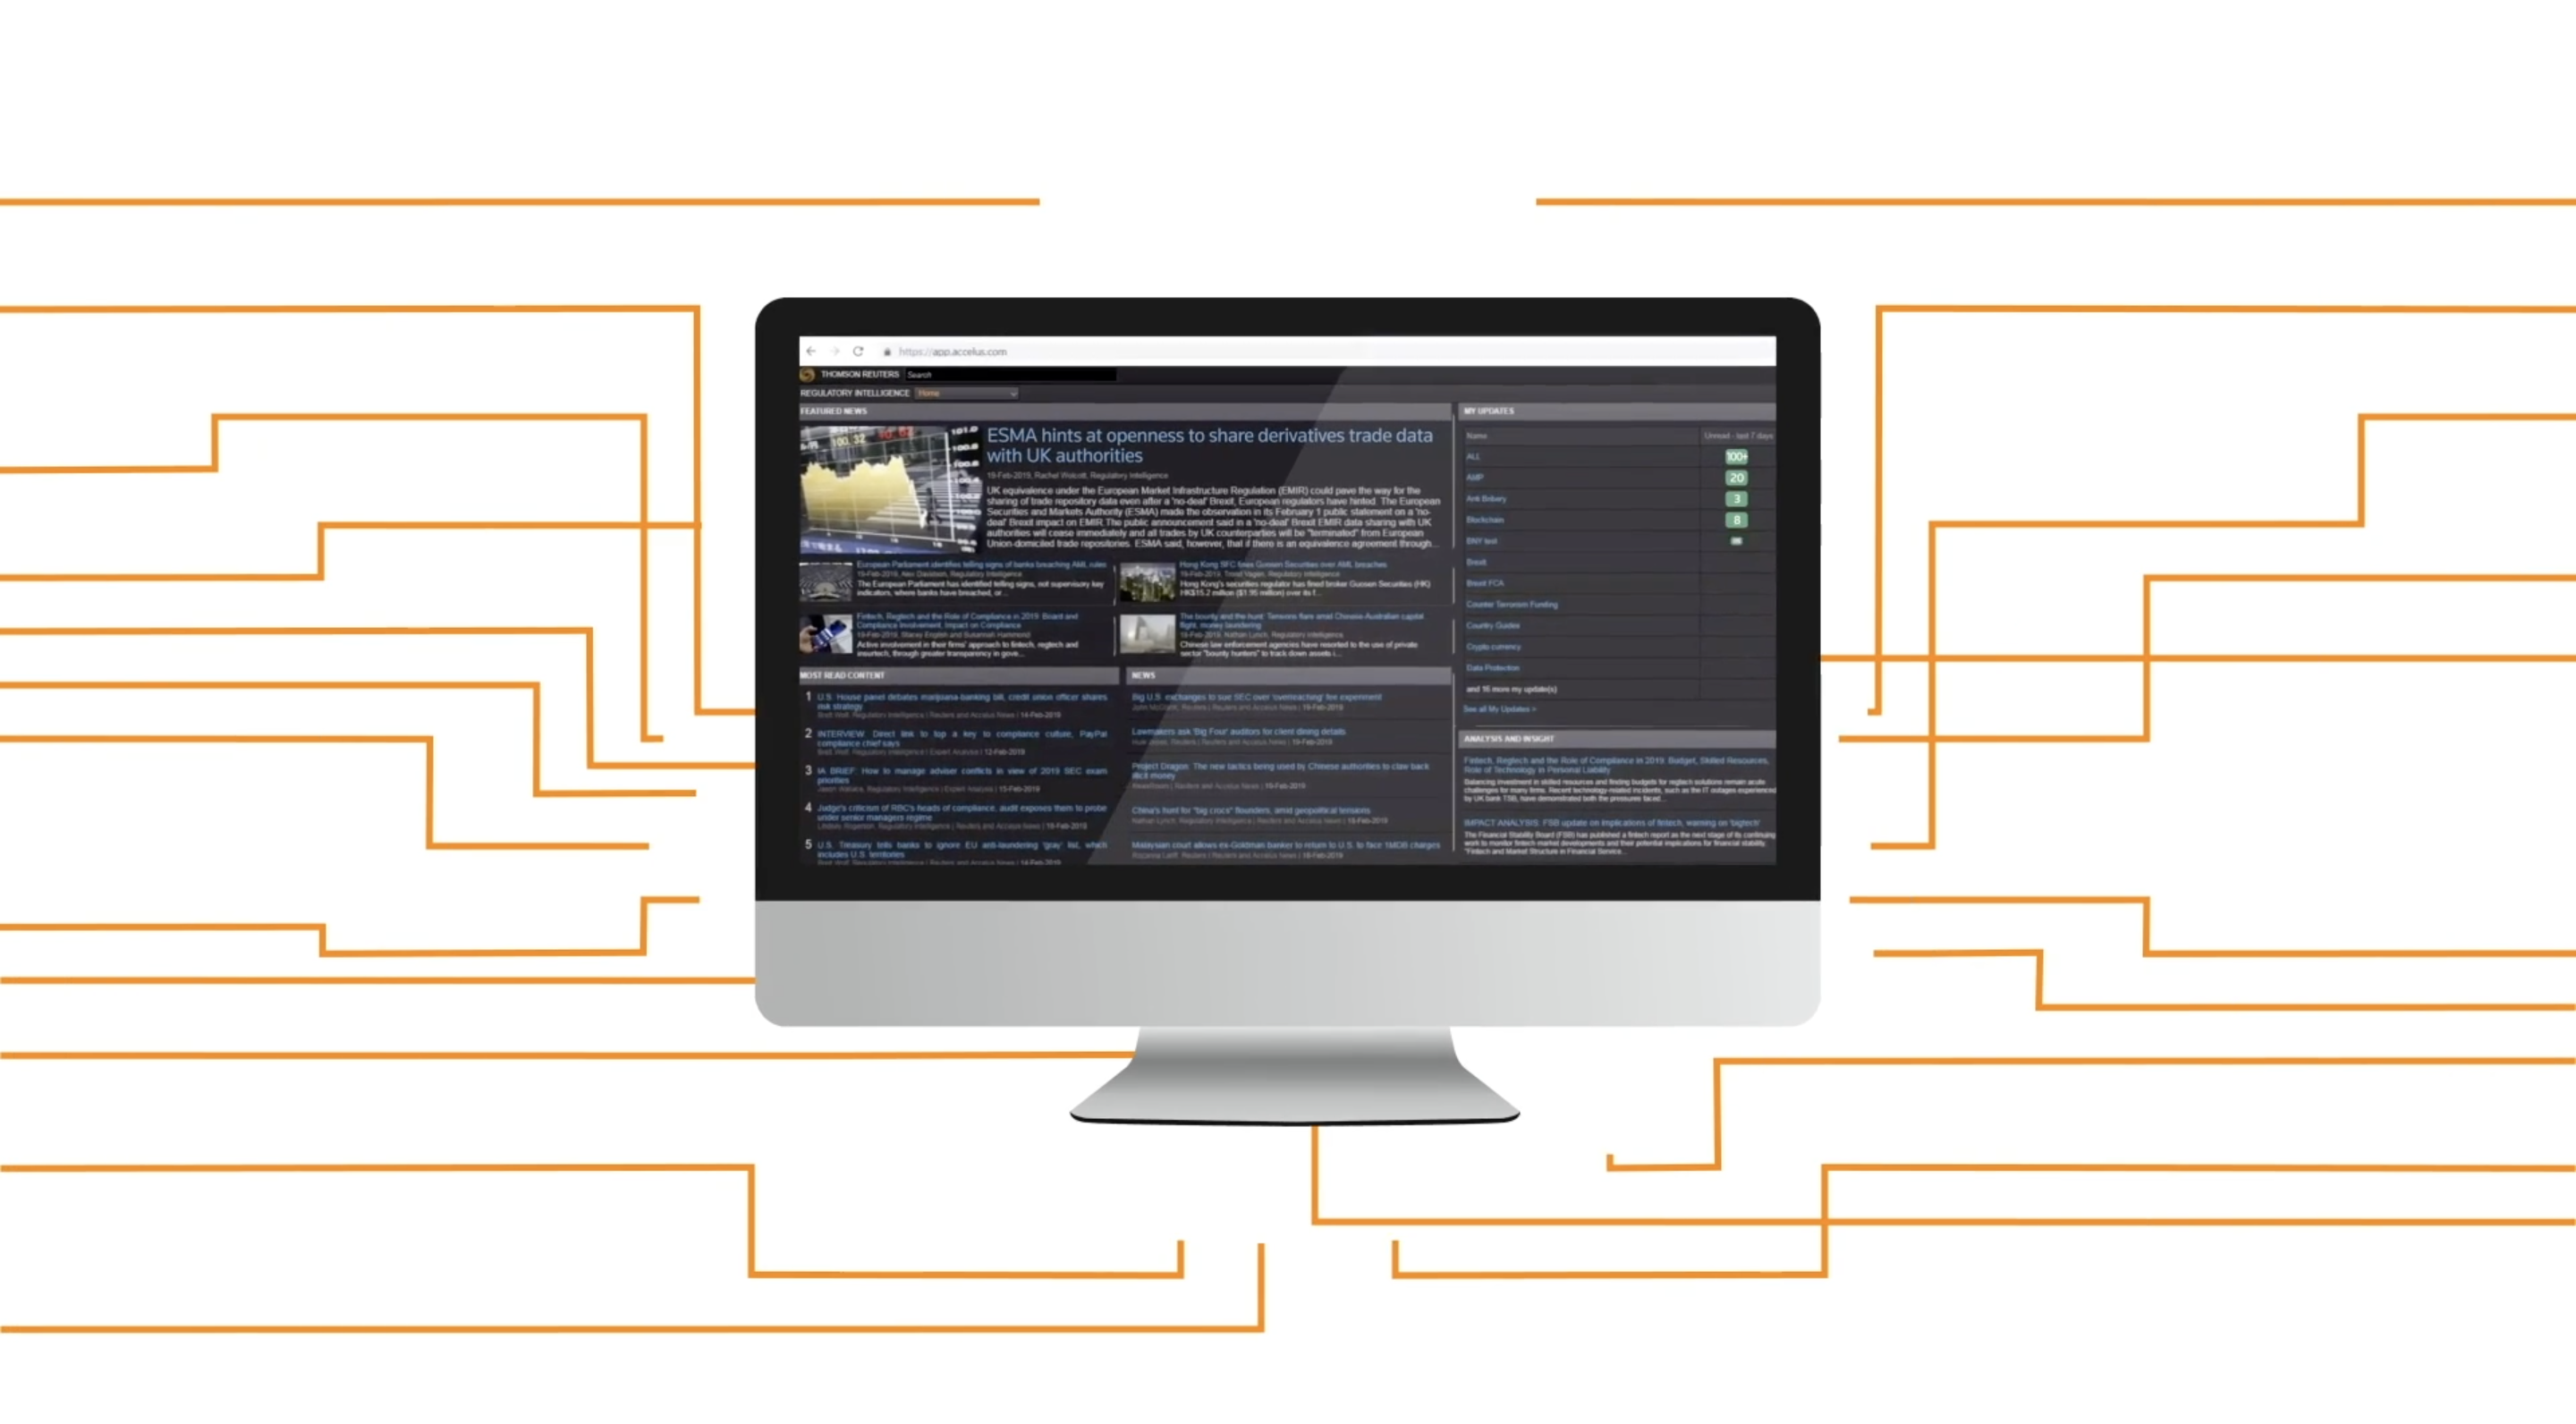 See how Thomson Reuters Risk Intelligence works